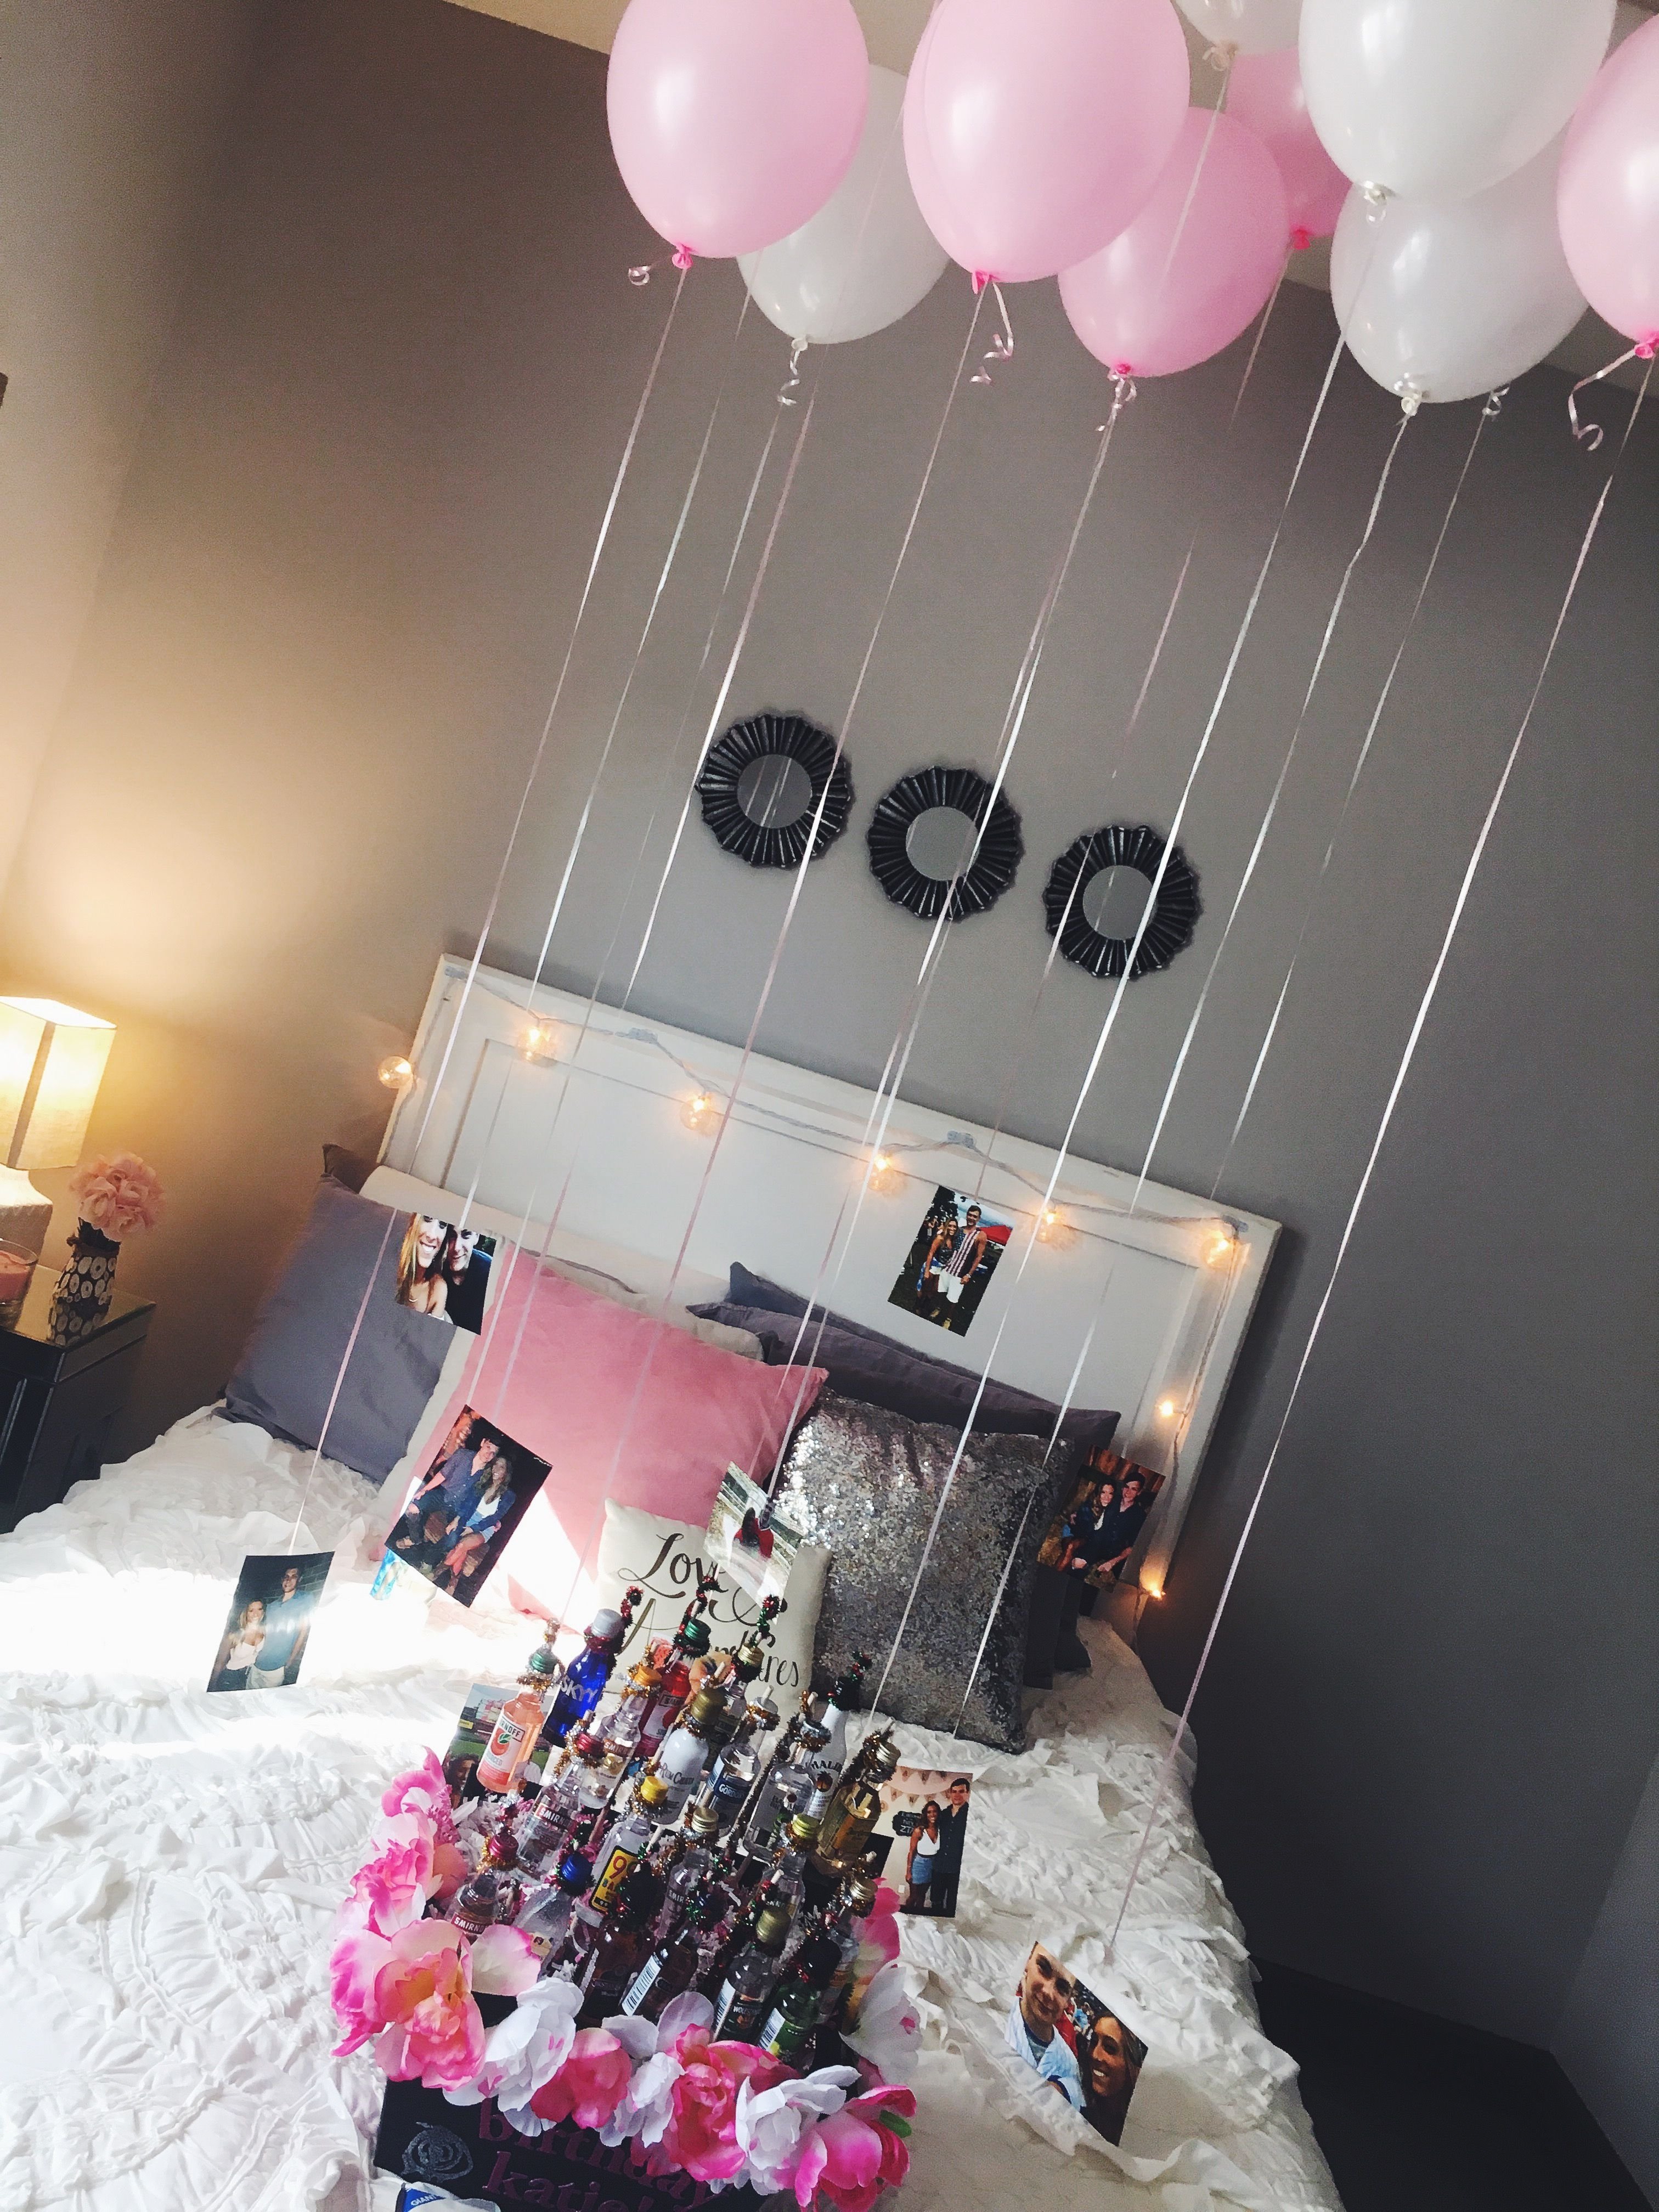 10 Famous Ideas To Surprise Your Girlfriend easy and cute decorations for a friend or girlfriends 21st birthday 6 2022